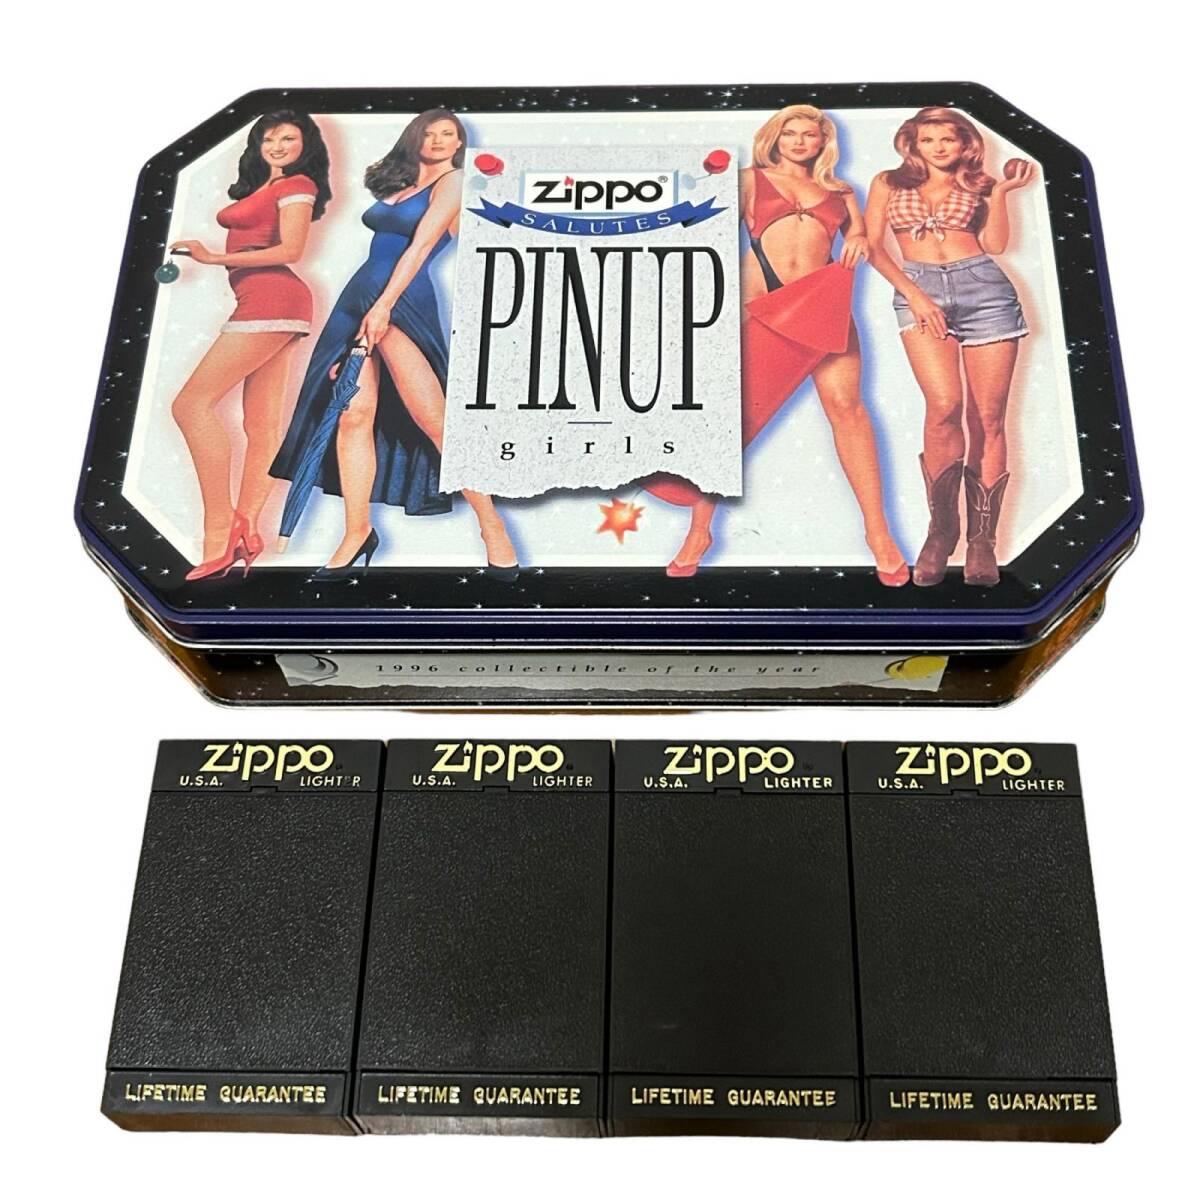 ZIPPO ジッポー 1996 Collectible of the Year PINUP girls ピンナップガール THE Four Seasons 1996年製 4点セット ライターの画像1